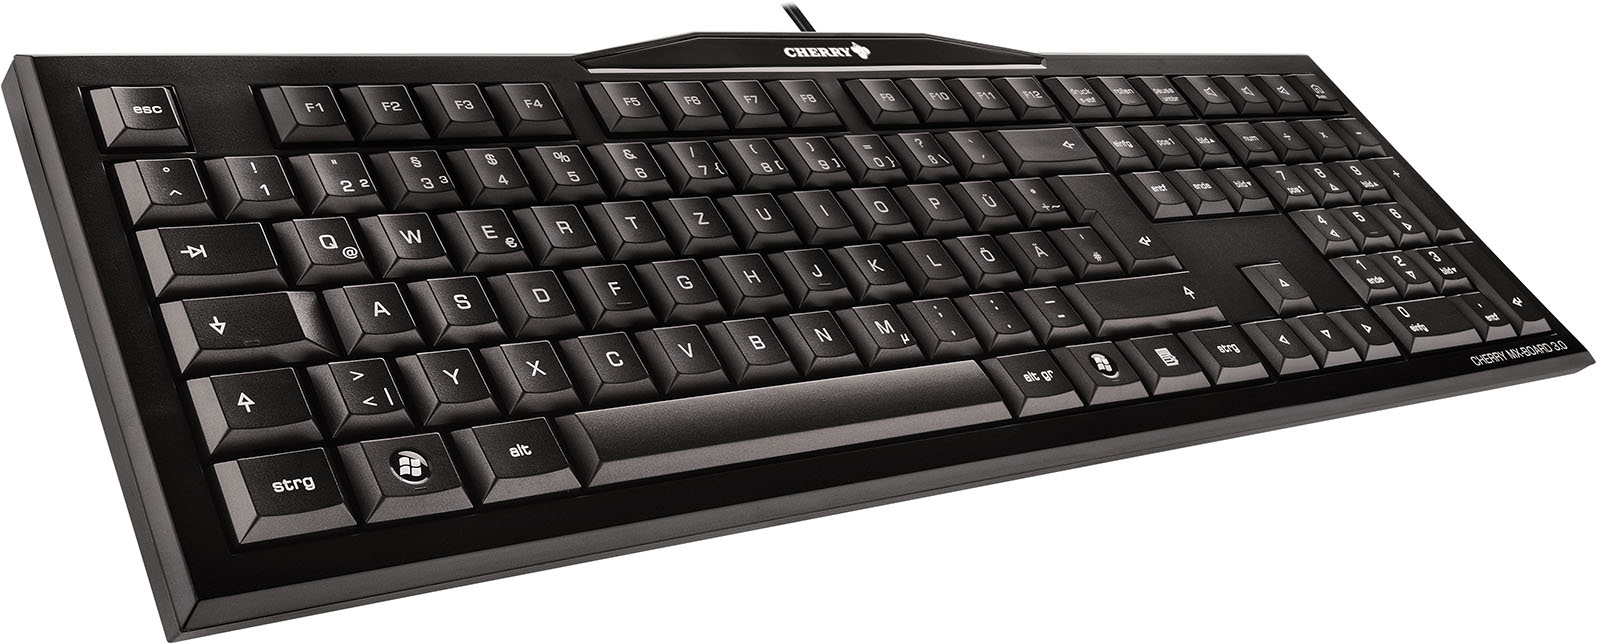 CHERRY On Top? A Review Of CHERRY's MX-Board 3.0 Professional Keyboard –  Techgage